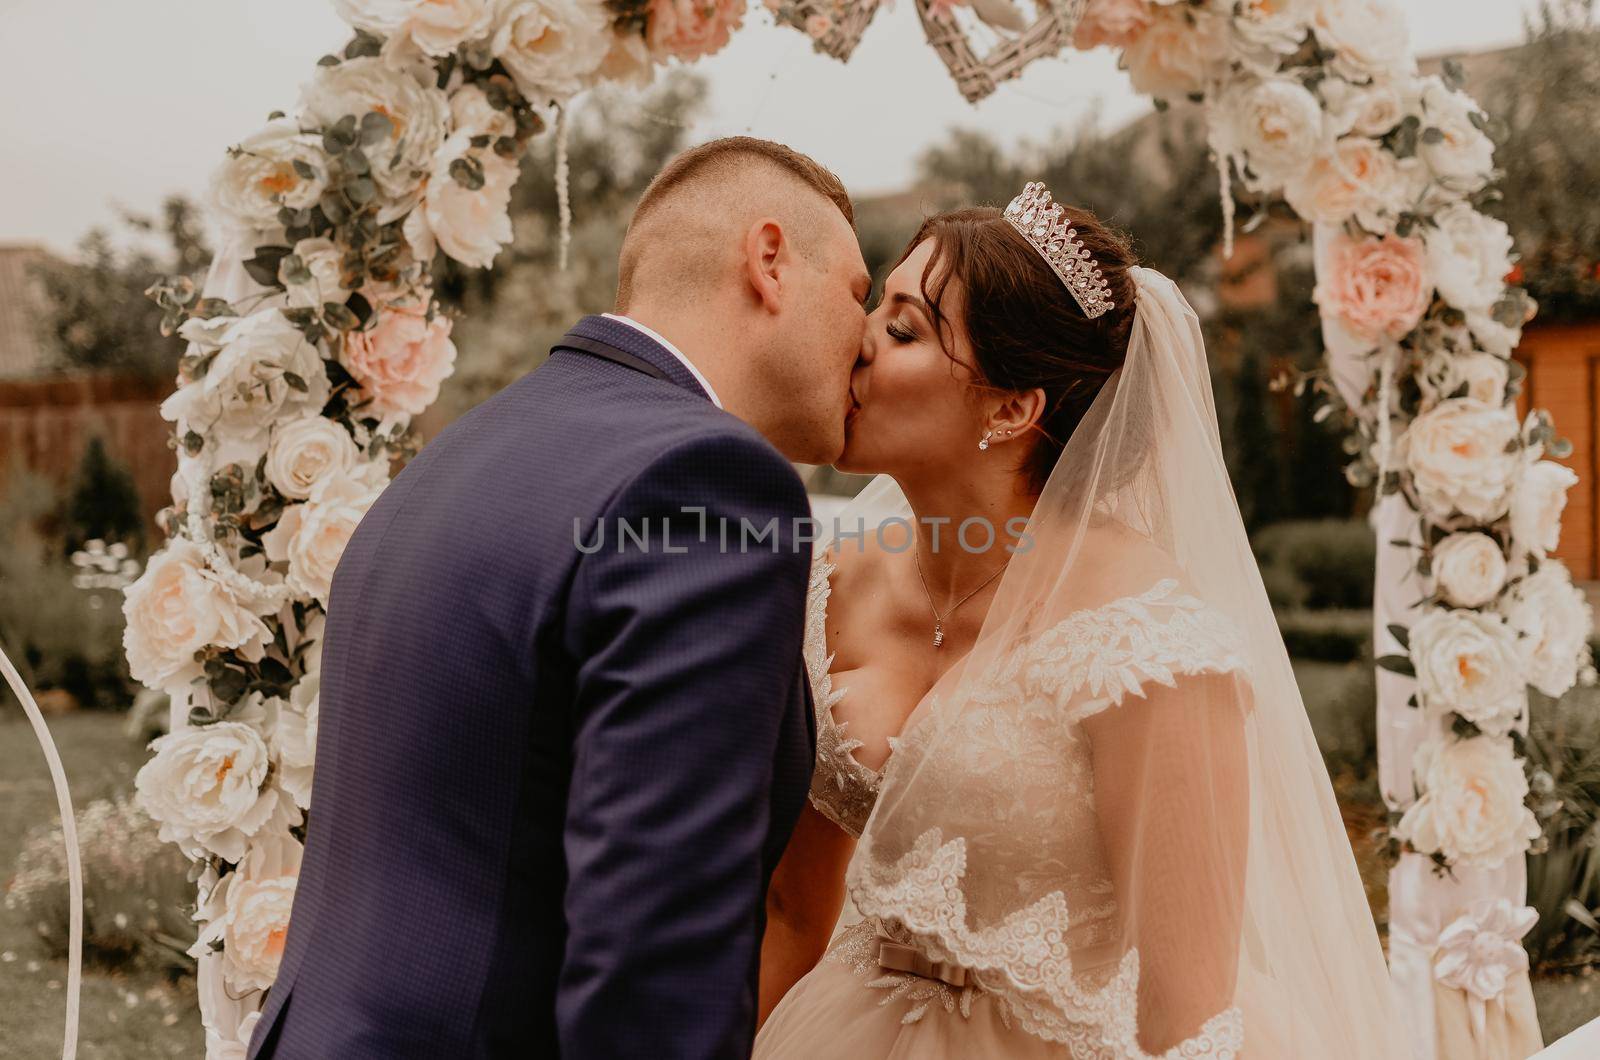 wedding ceremony on the background of a flower arch laughing kissing by AndriiDrachuk